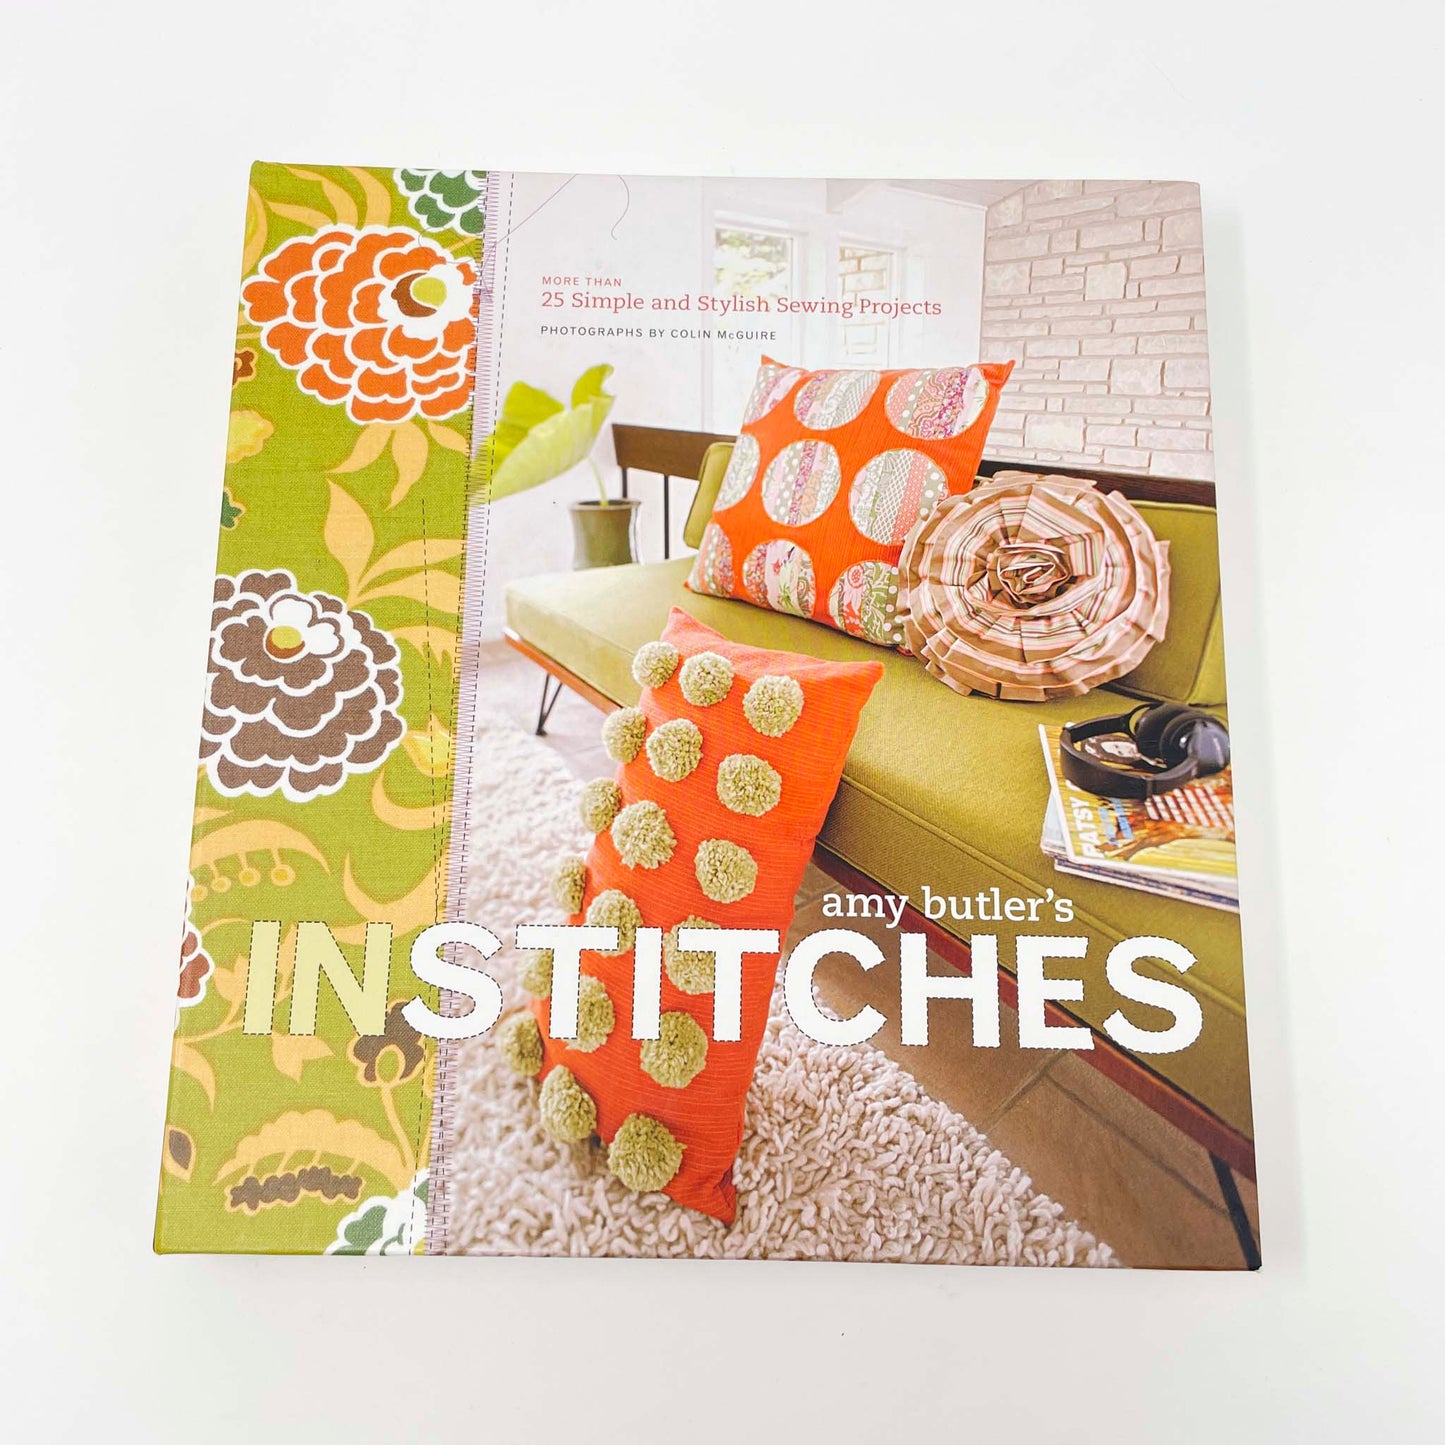 Amy Butler's In Stitches: More Than 25 Simple and Stylish Sewing Projects